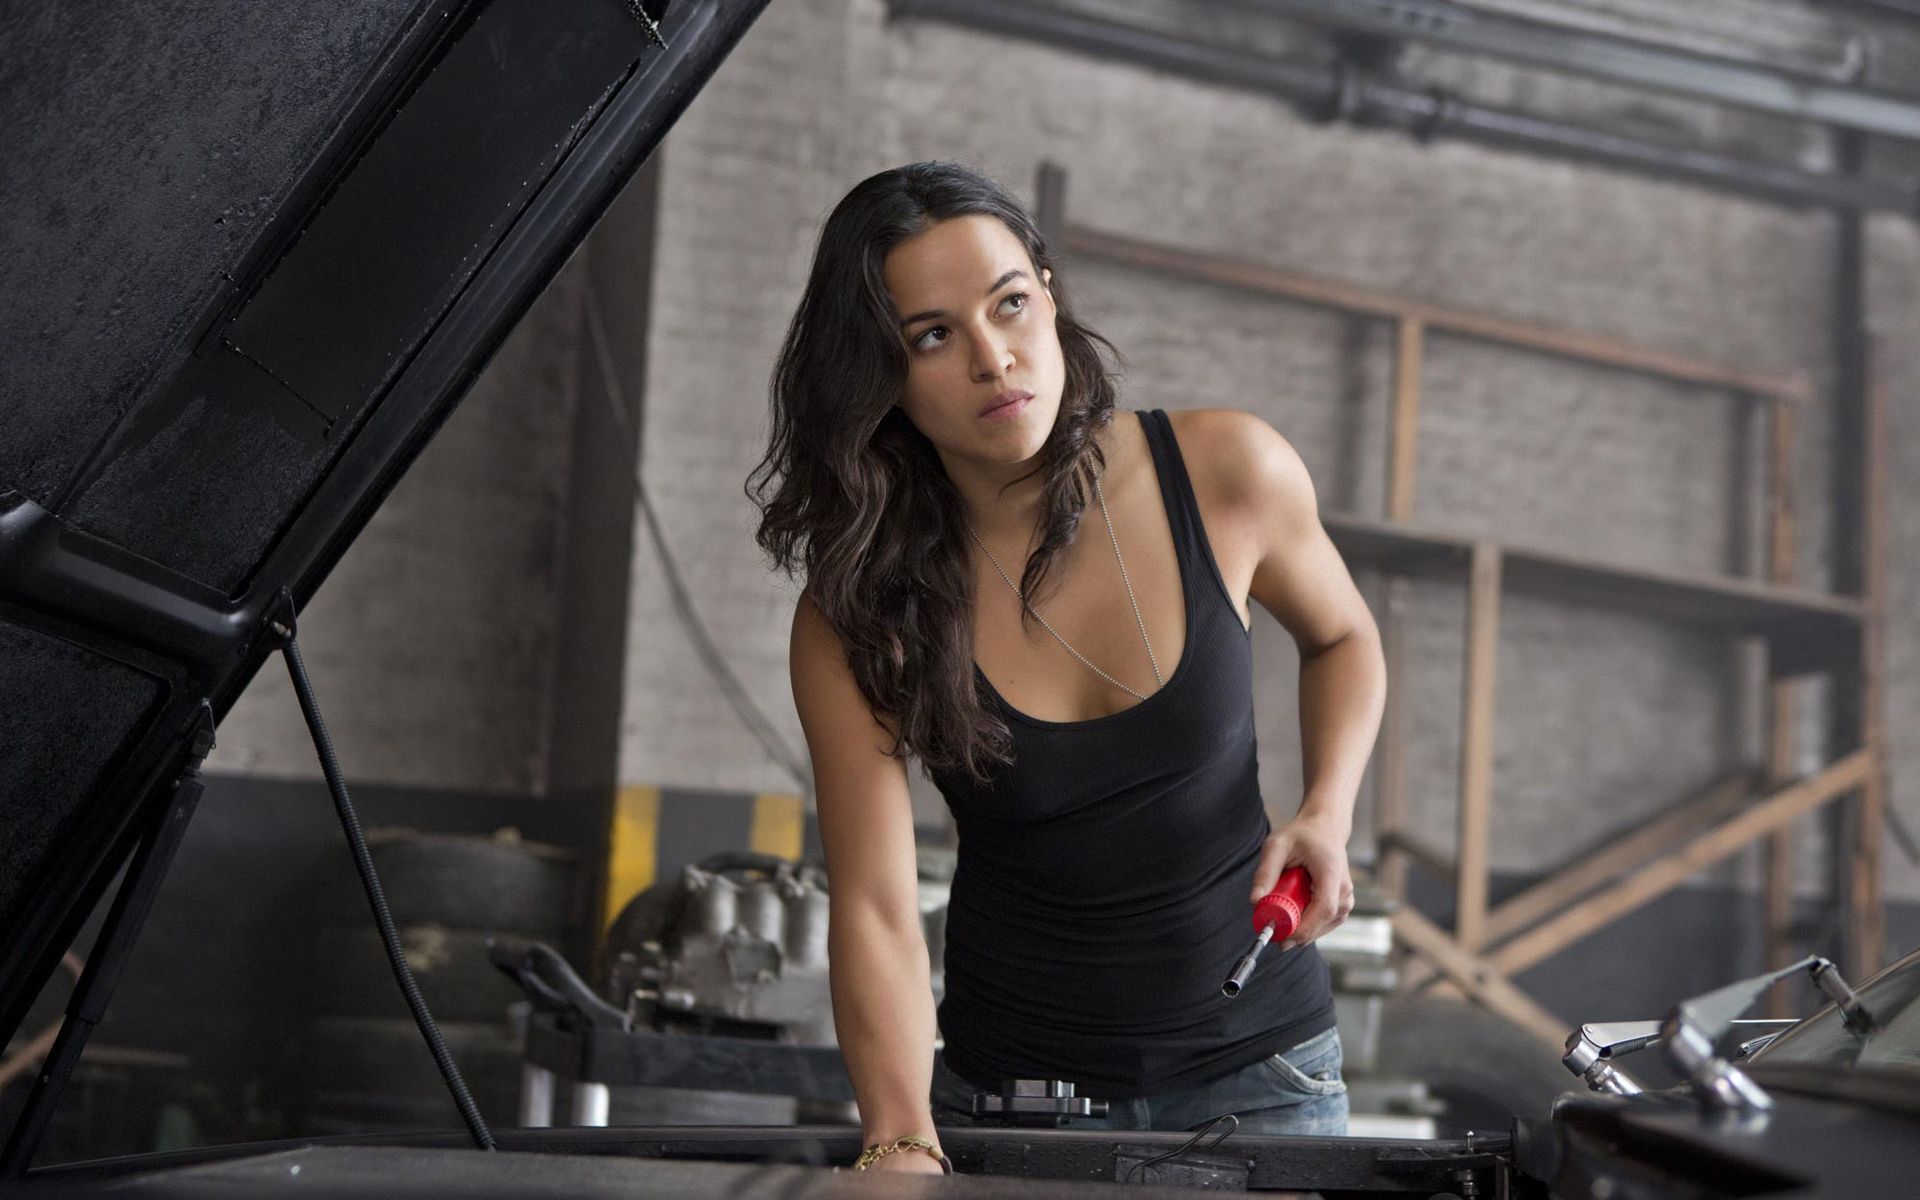 Fast and Furious' Star Michelle Rodriguez Wants More Female Stars